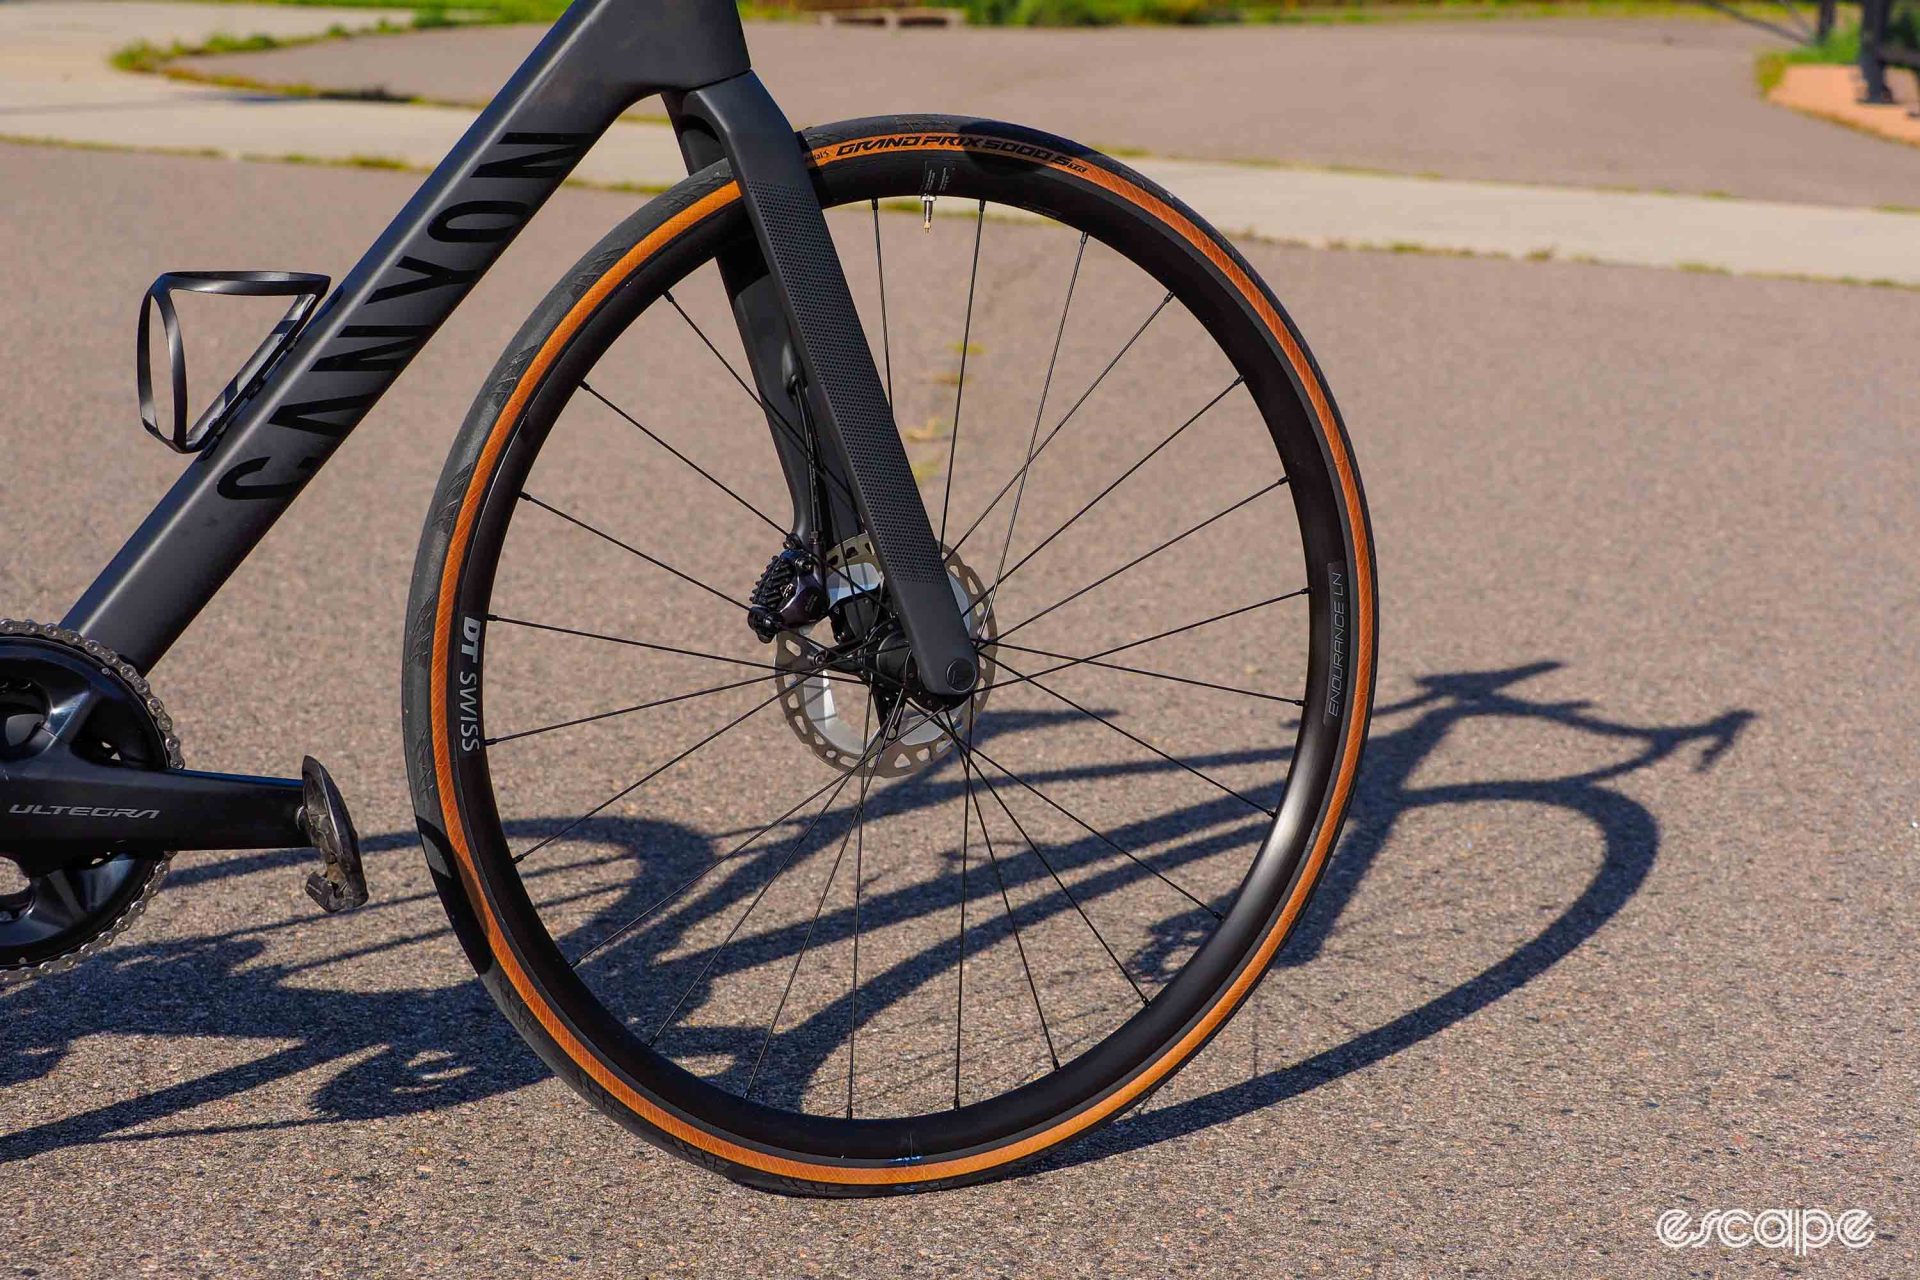 The DT Swiss Endurance LN wheelset isn't flashy, with black rims and subtle decals on a low-profile, 23 mm-deep rim, but they're solid hoops.